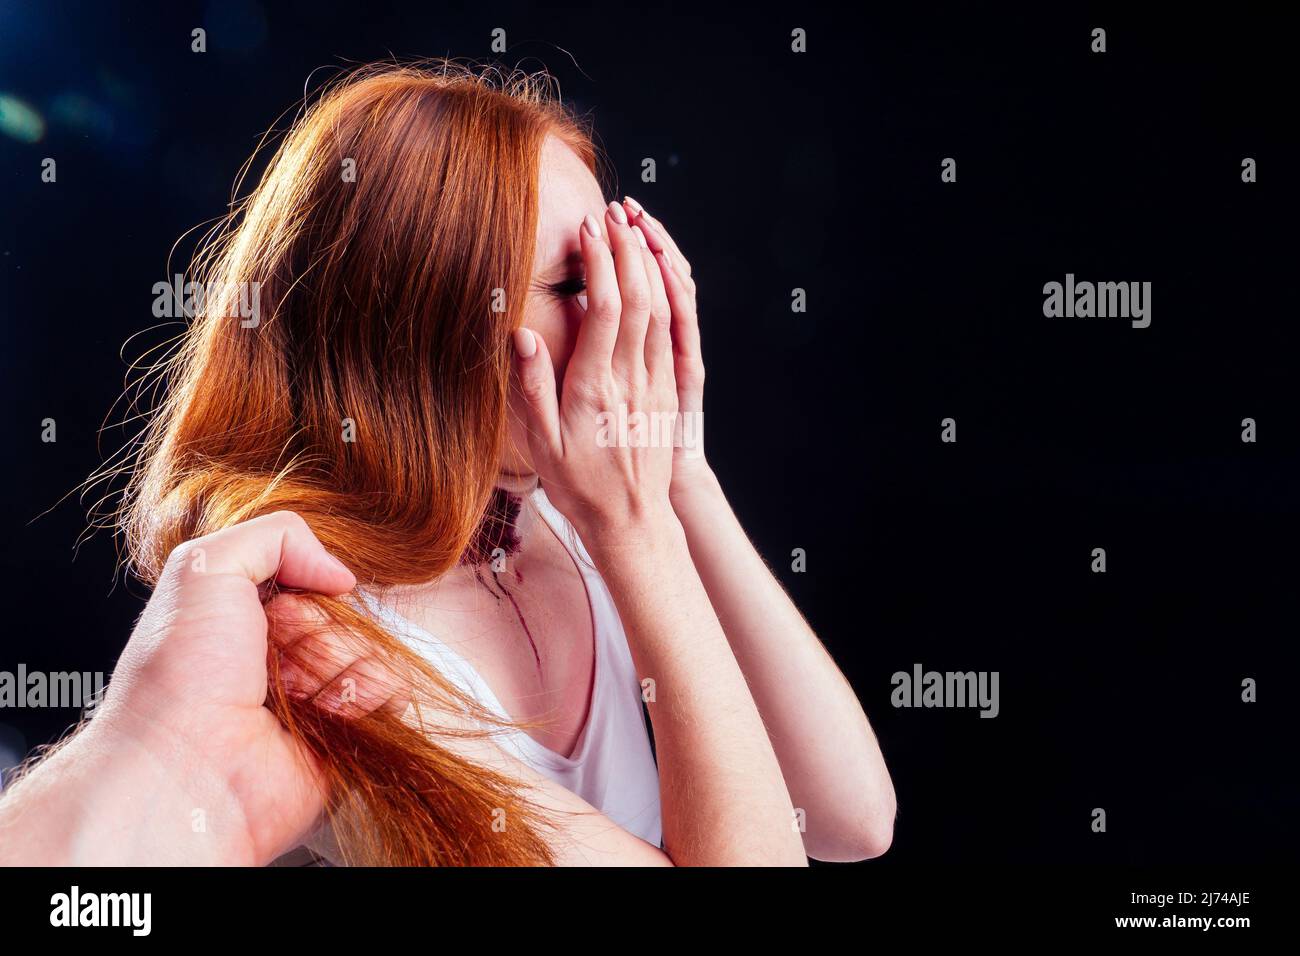 Depressed outsider student crying after intruder attacker rapist Stock Photo